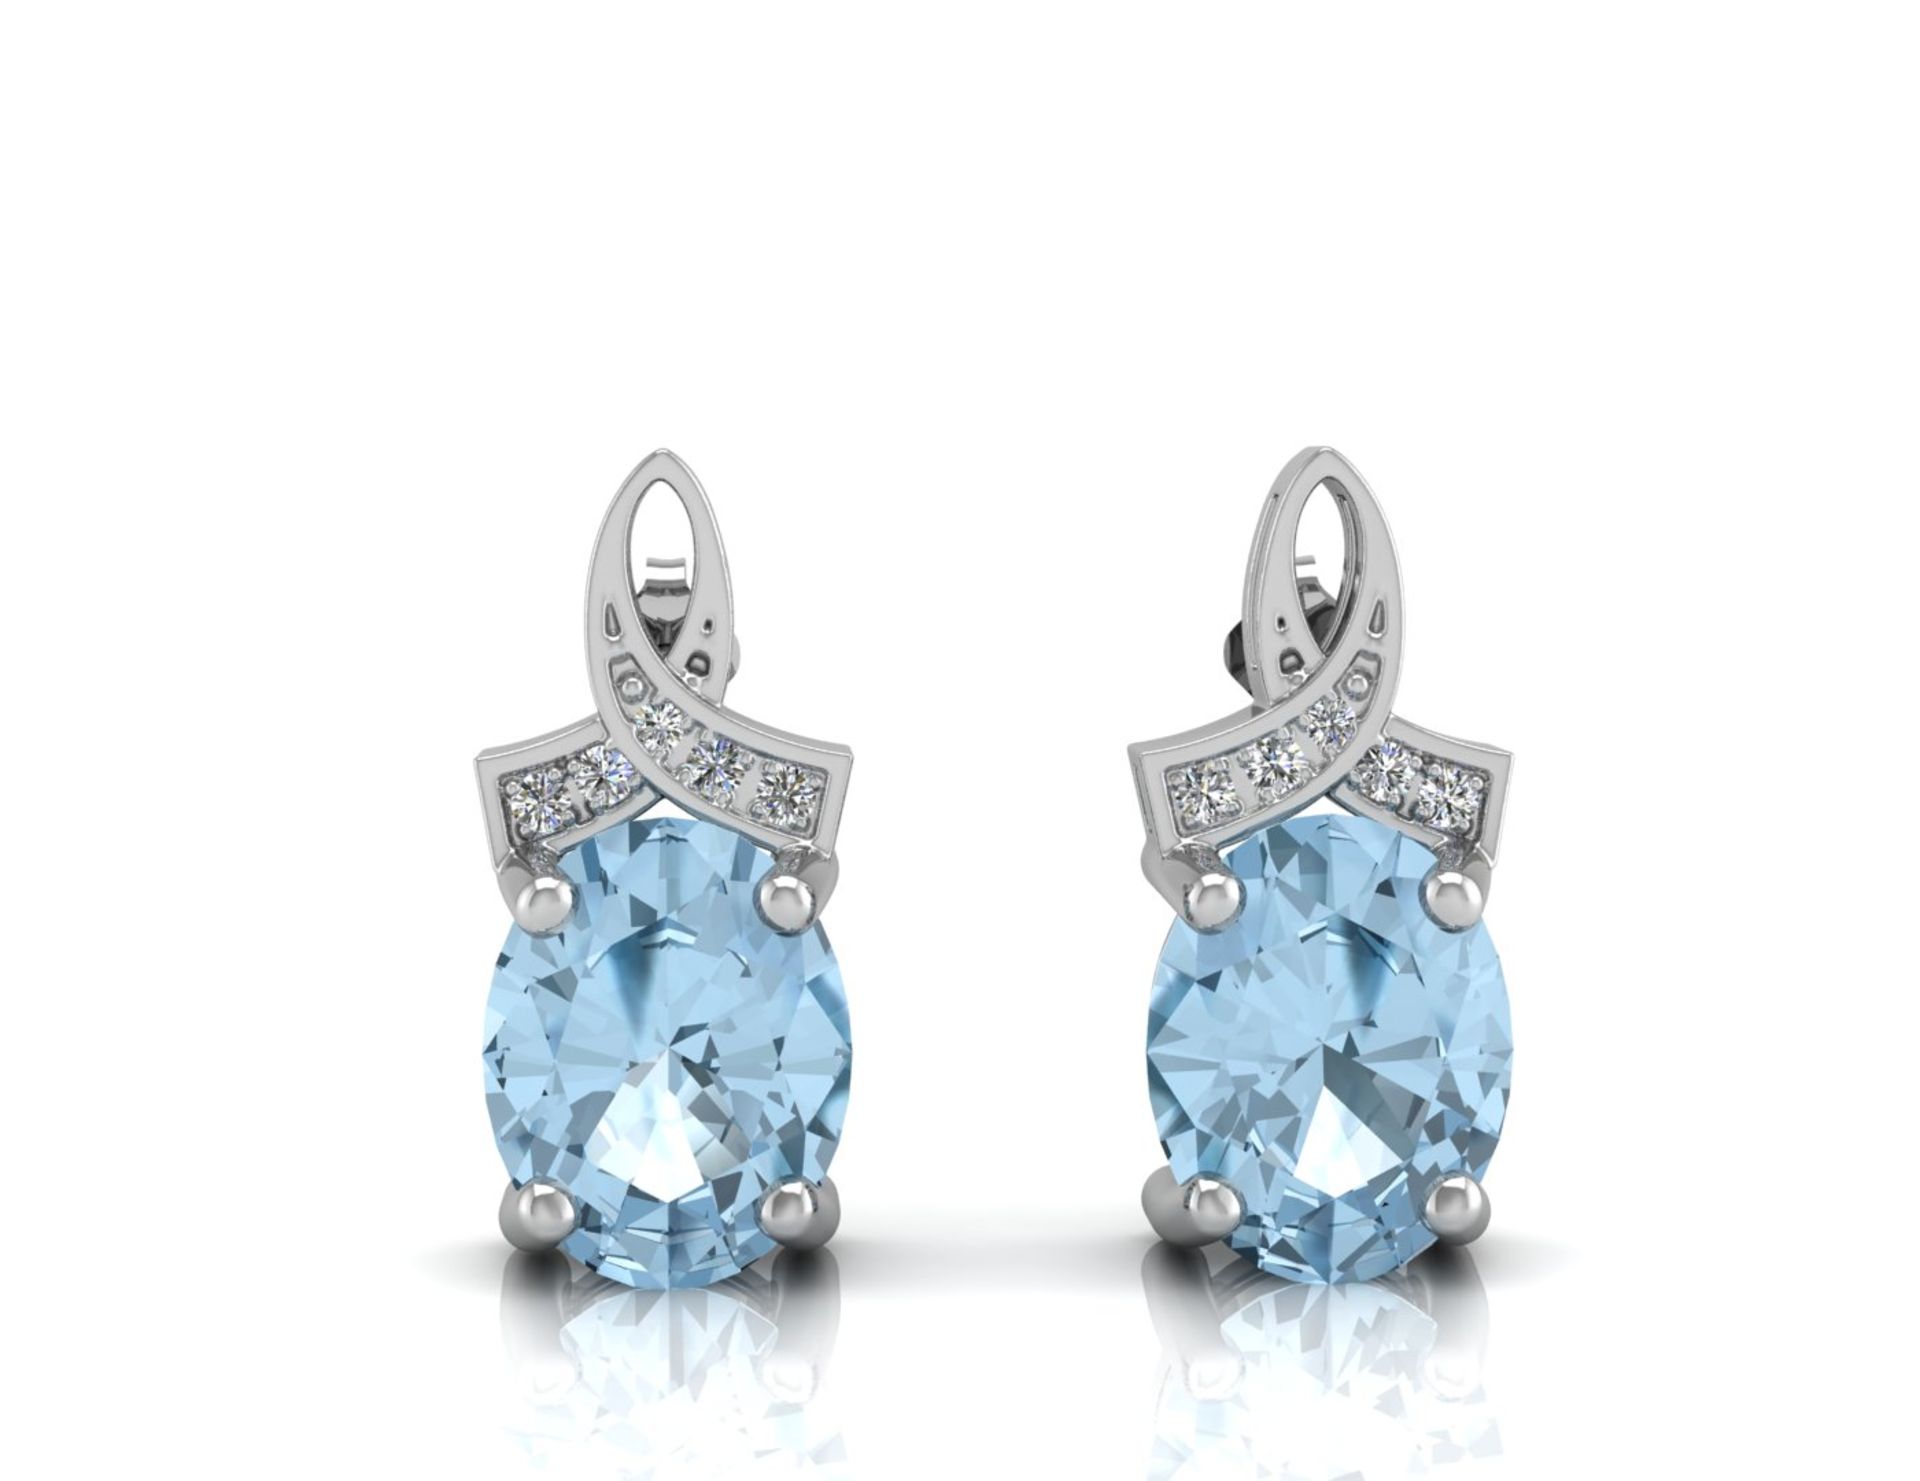 9ct White Gold Diamond And Blue Topaz Earring 0.03 Carats - Valued by GIE £1,140.00 - 9ct White Gold - Image 3 of 4